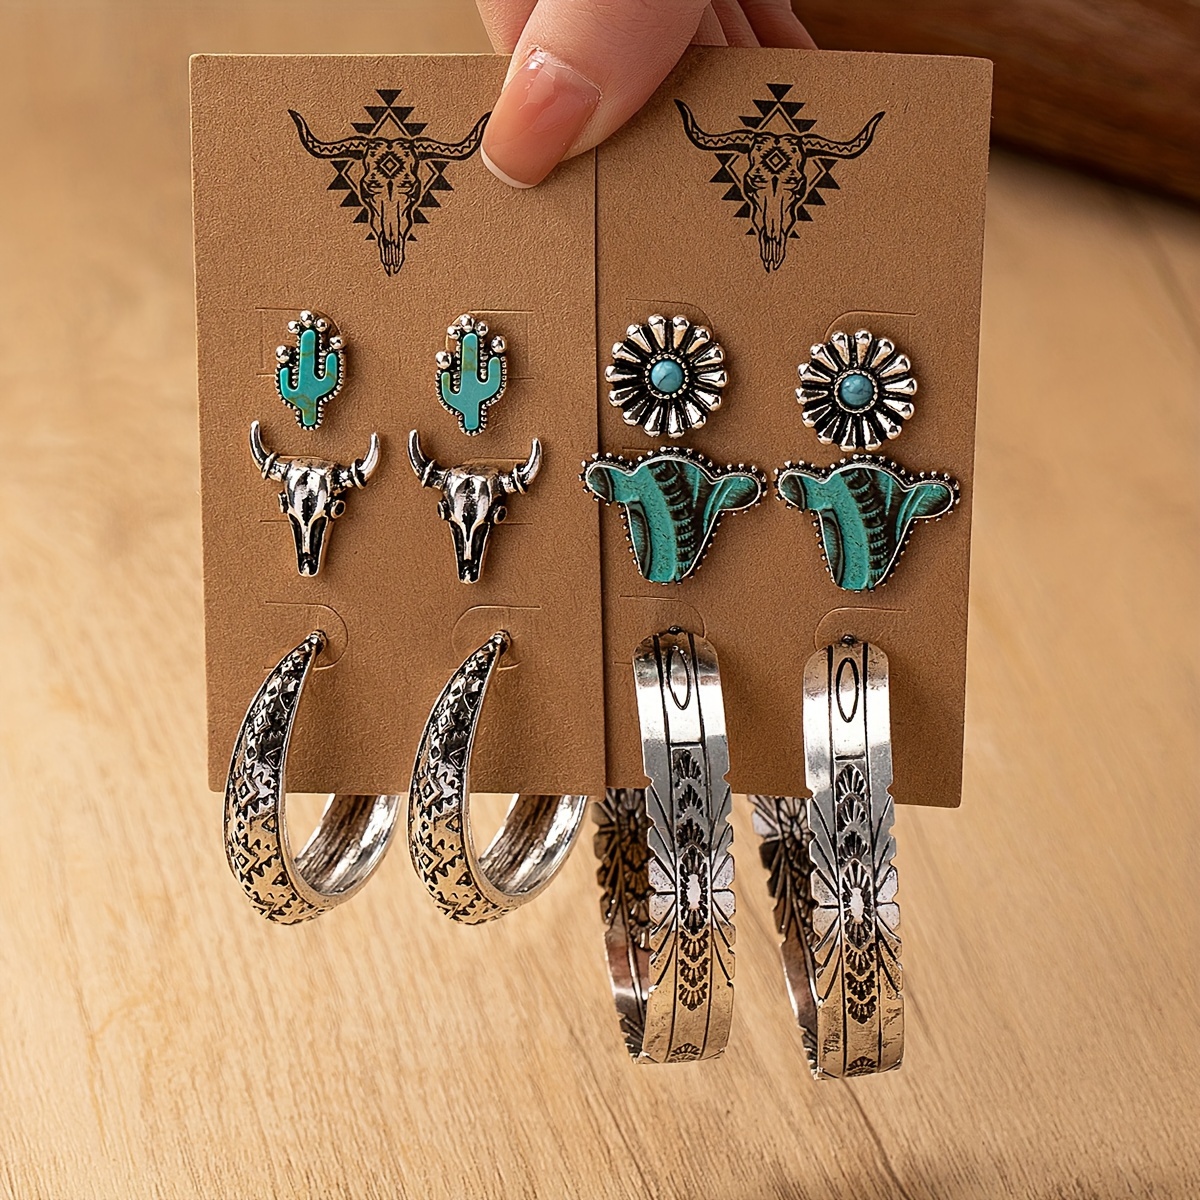 

3 Pairs Antique Silver Color Western Style Turquoise Stone Decor Cactus Cow Head Stud Earring Aztec Hoop Earrings Set For Women